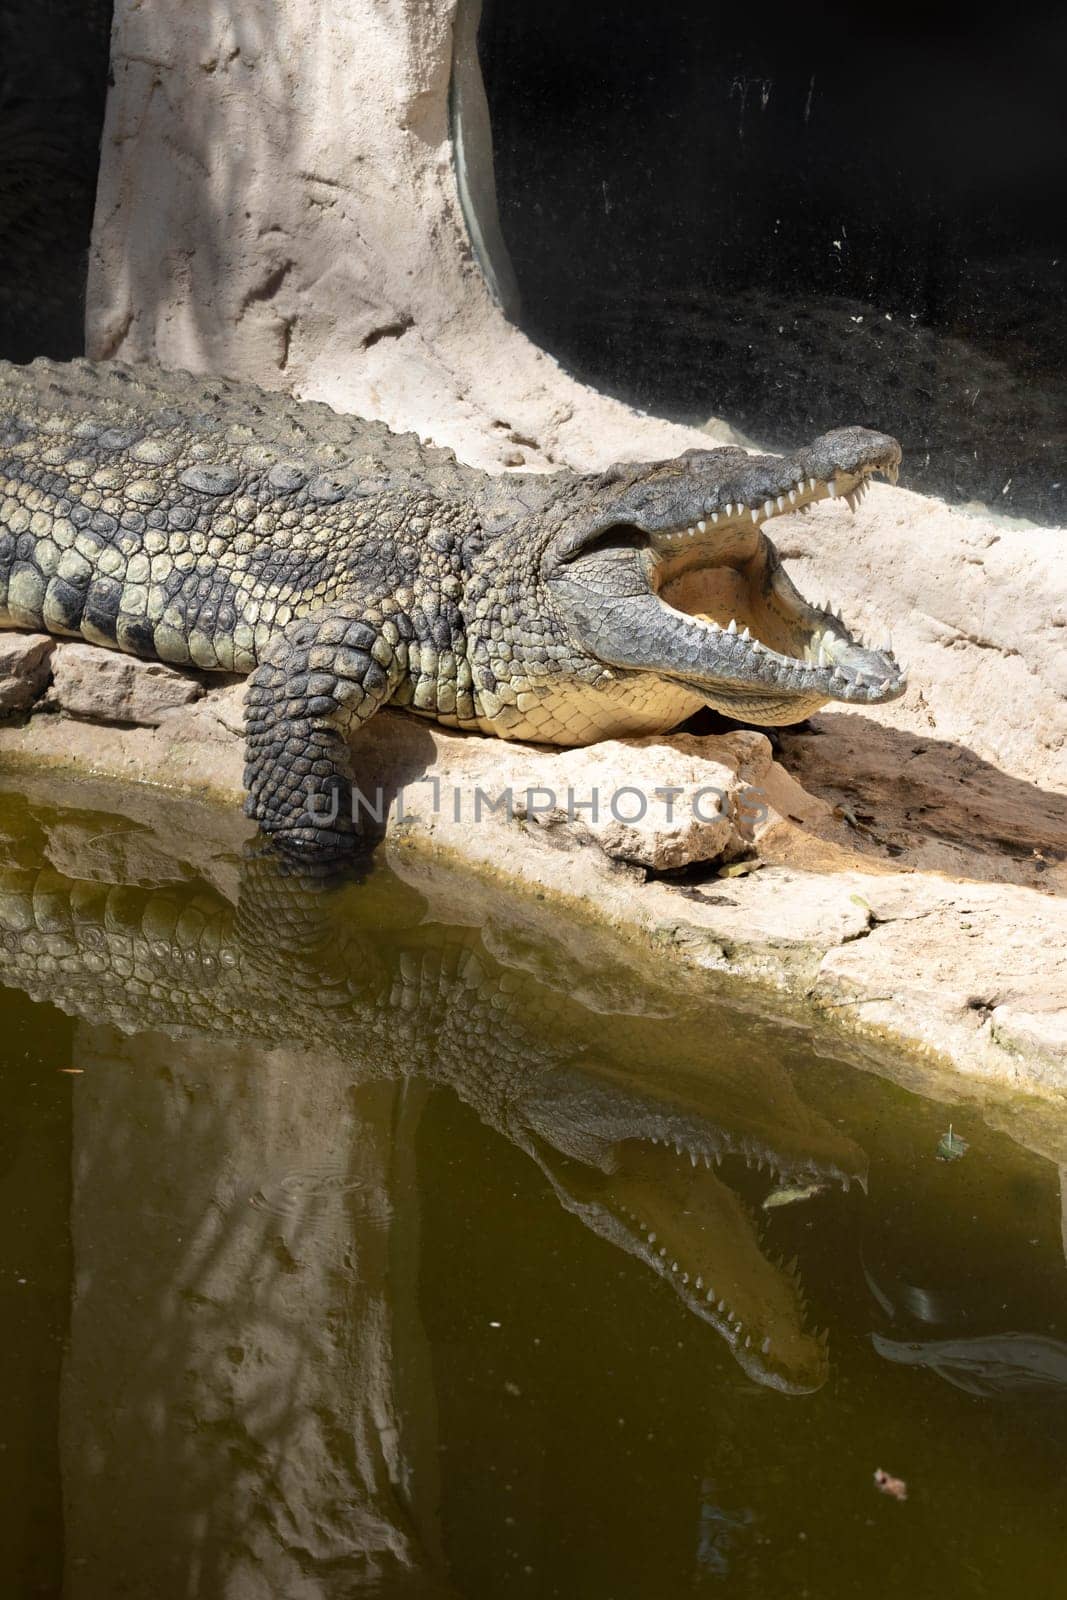 The crocodile opened its mouth in anticipation of prey. High quality photo